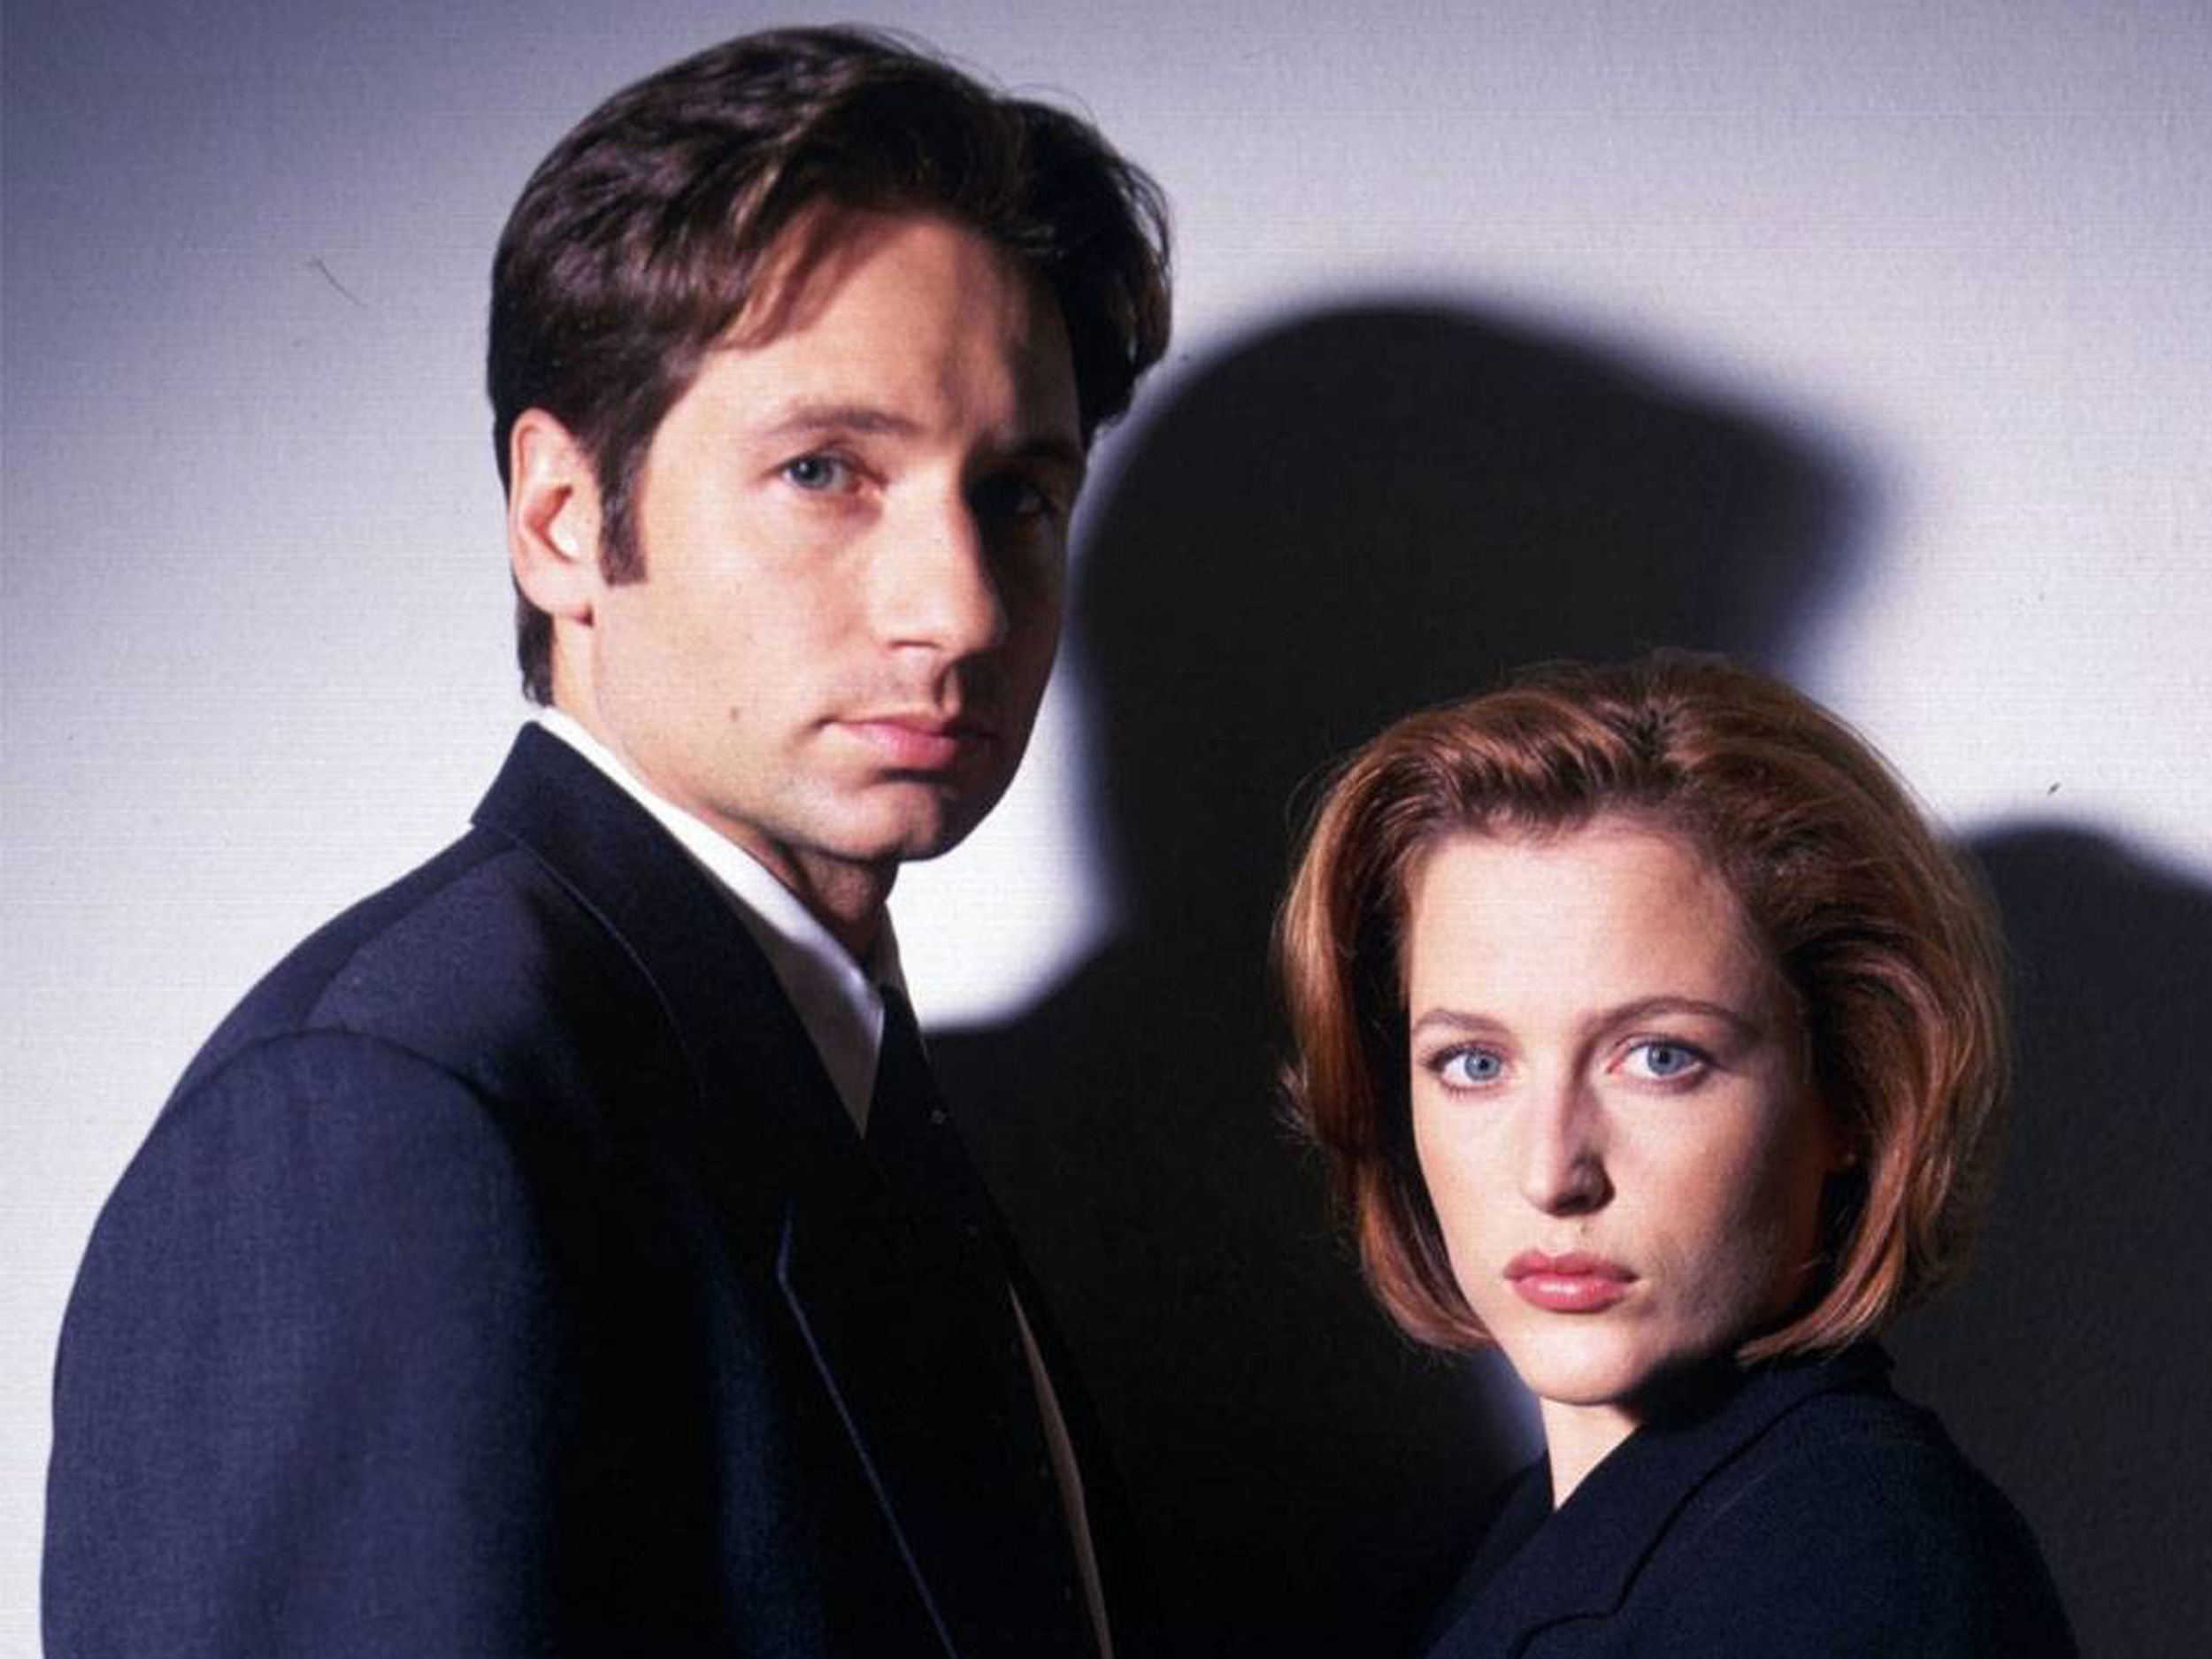 in-true-mulder-and-scully-fashion-i-have-finally-uncovered-a-handful-of-behind-the-scenes-477704